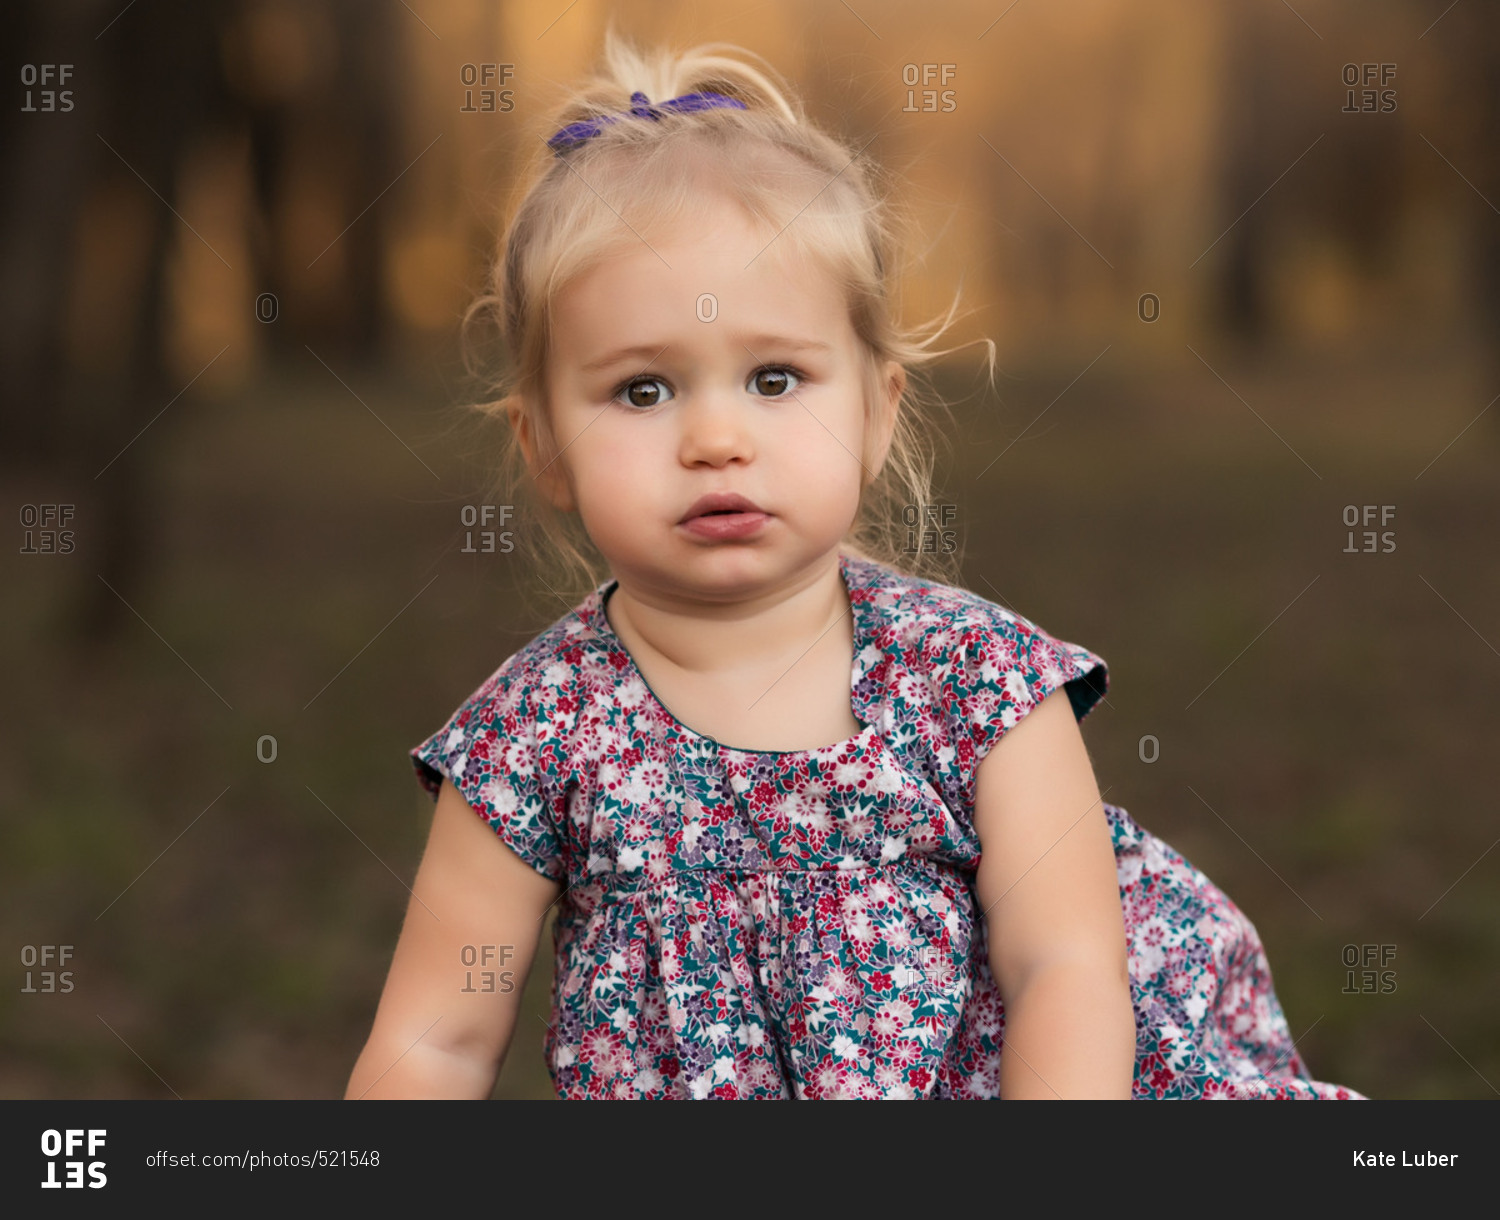 Portrait Of Little Girl With Blond Hair And Brown Eyes Seated